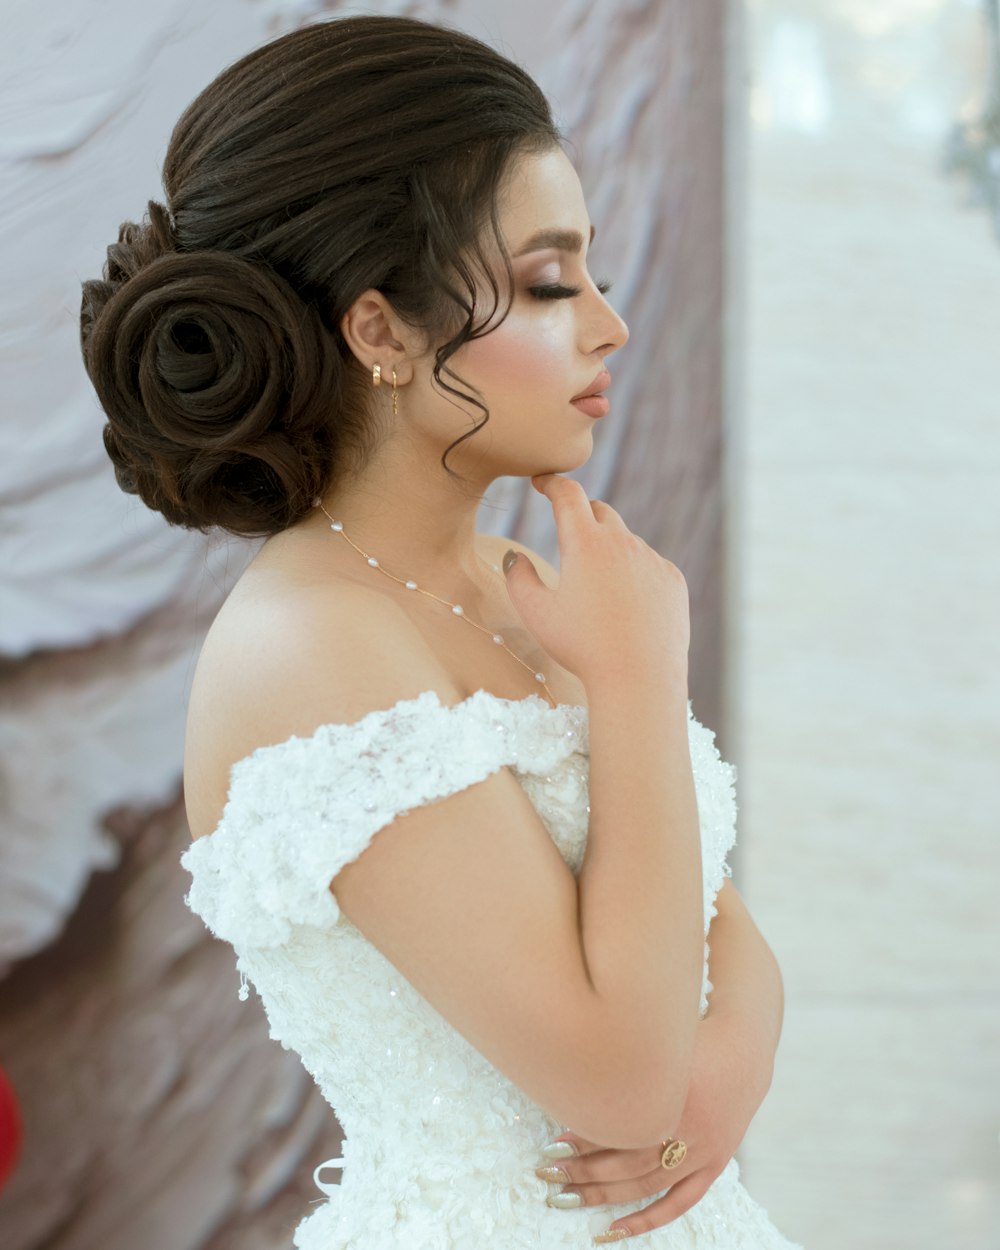 Wedding Hair Pictures | Download Free Images on Unsplash